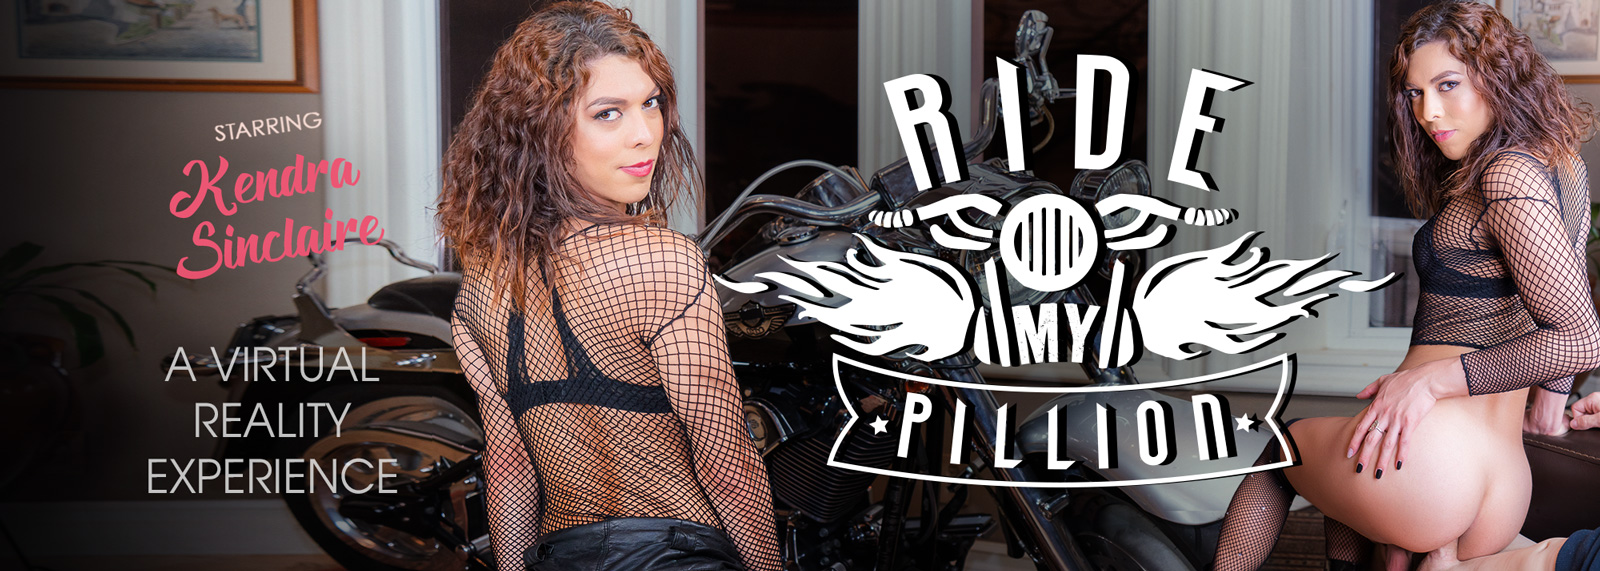 Ride My Pillion - Trans VR Porn Video, Starring: Kendra Sinclaire